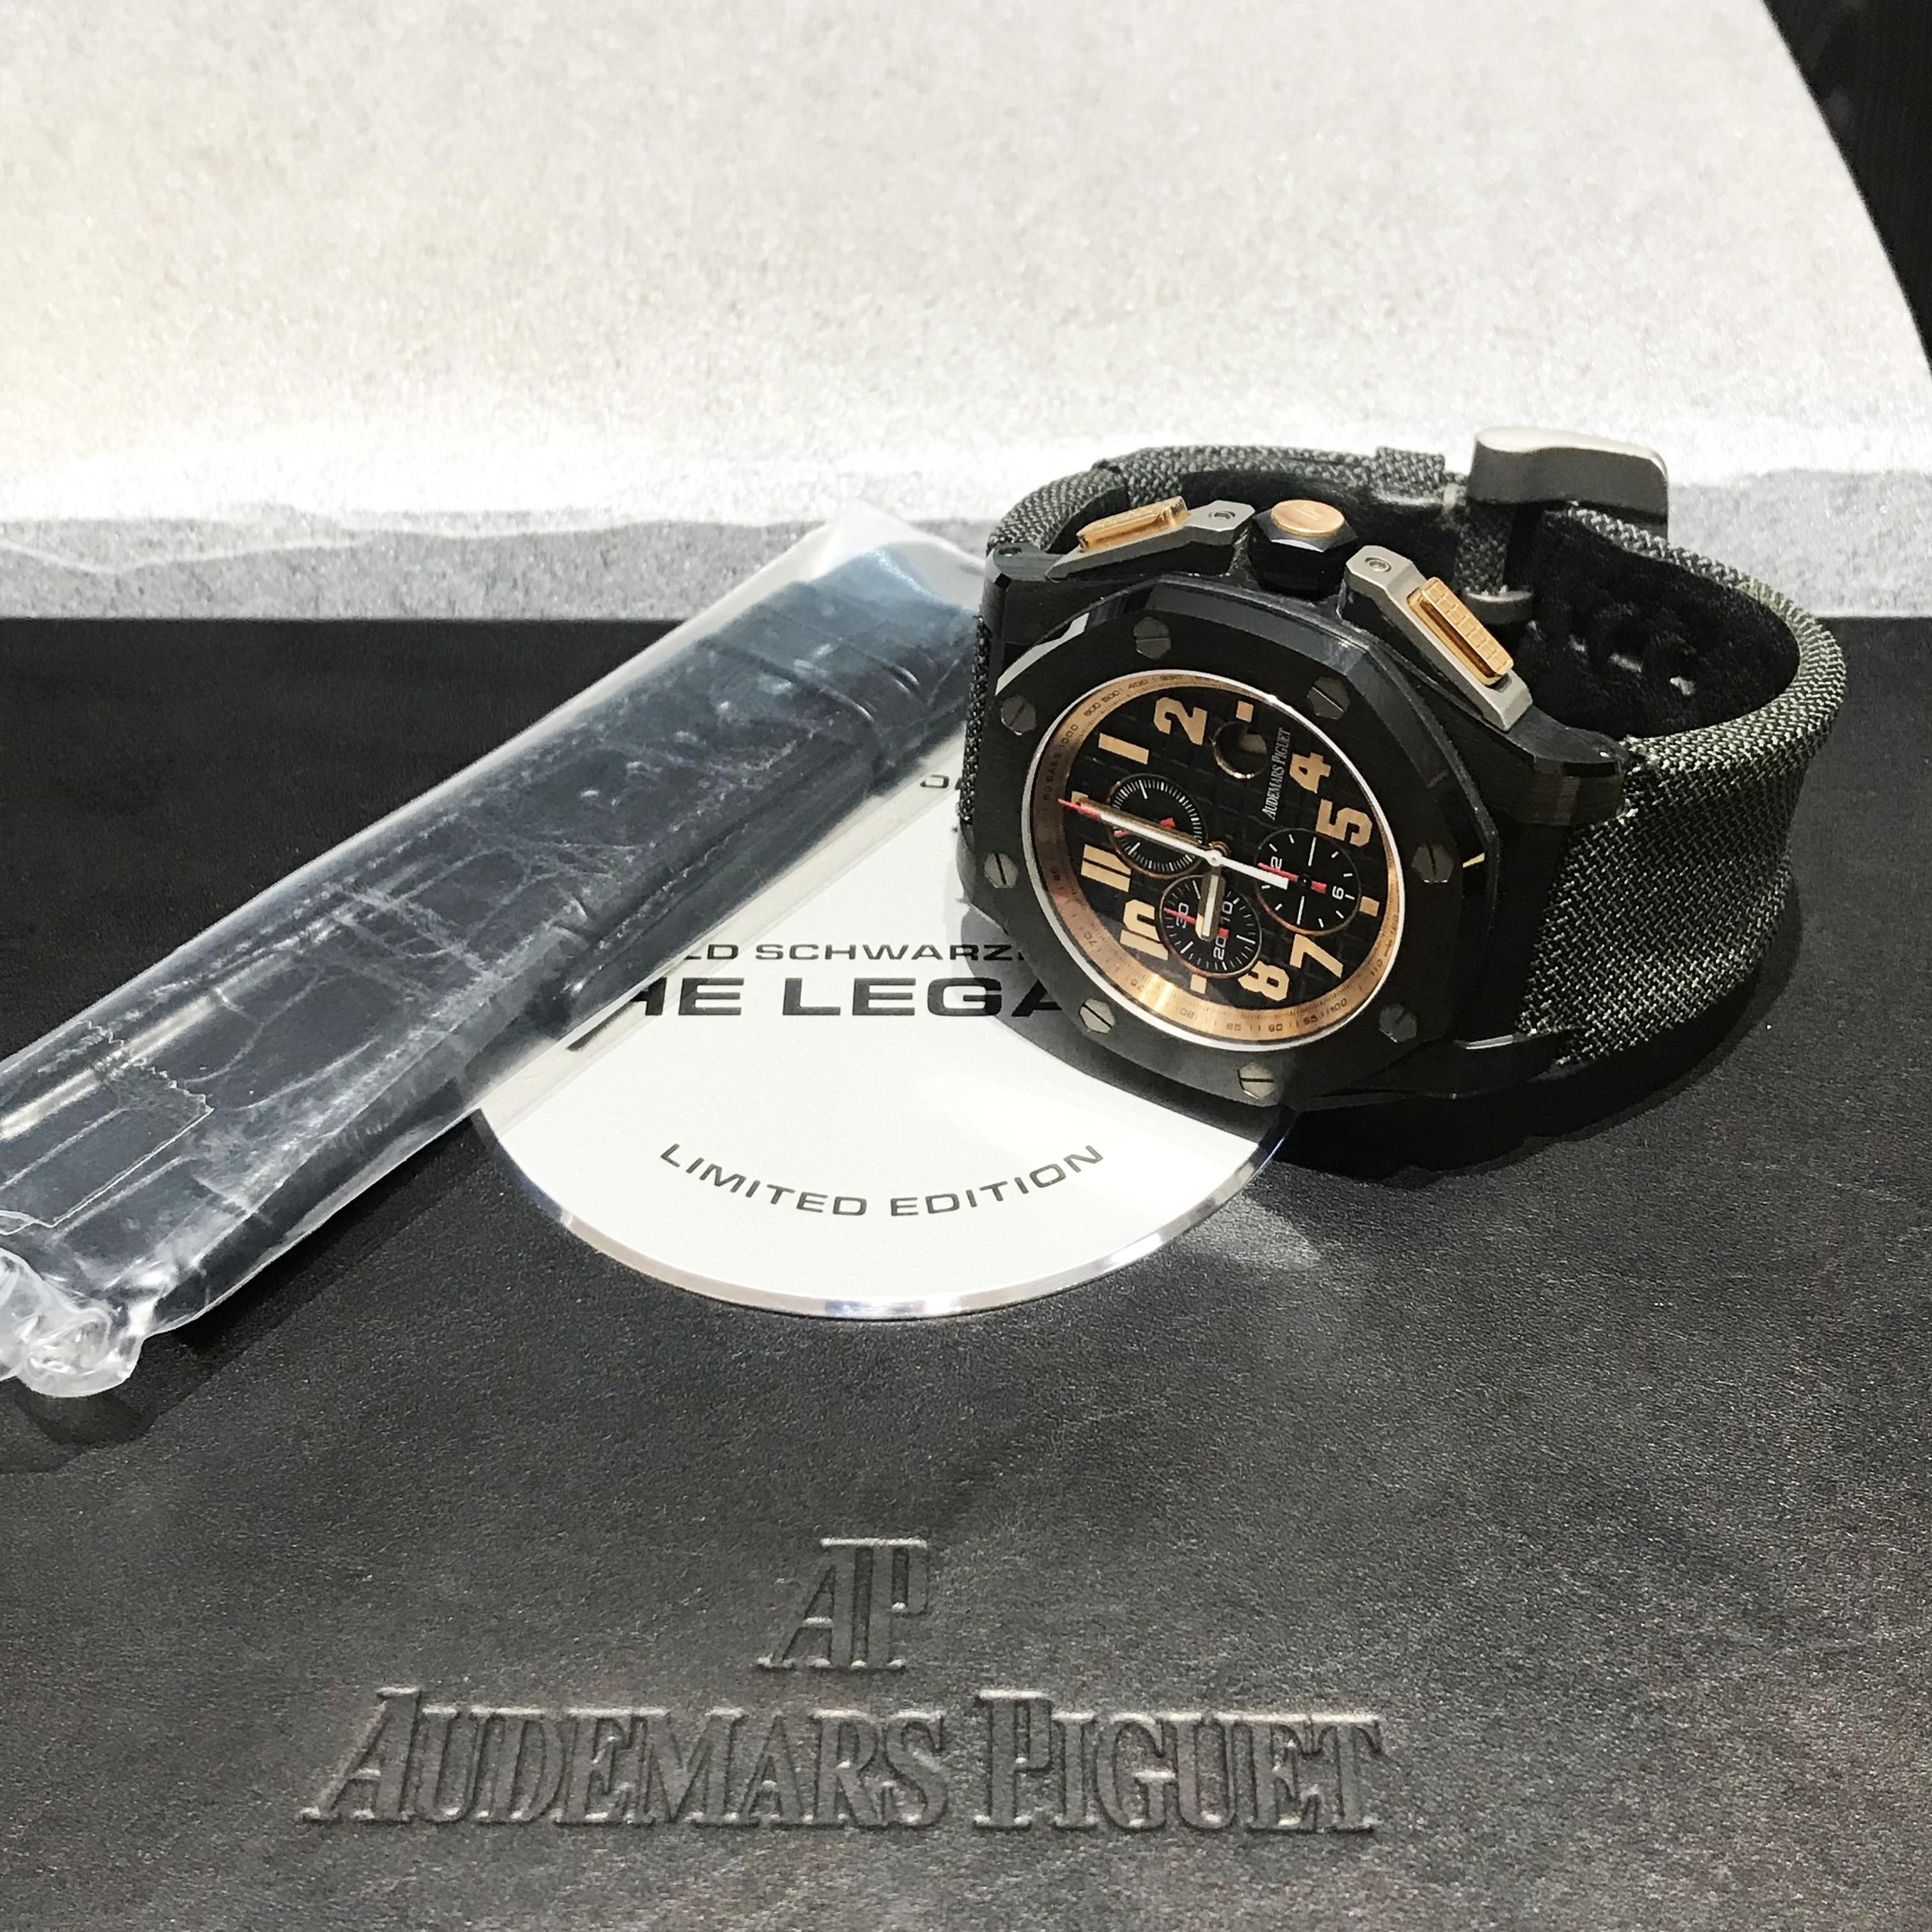 Audemars Piguet Royal Oak Offshore Reference #:26378IO.OO.A001KE.01. Ceramic case with a black rubber strap. Fixed bezel. Black dial with luminous hands and Arabic hour markers. Tachymeter scale appears around the outer rim. Dial Type: Analog. Date